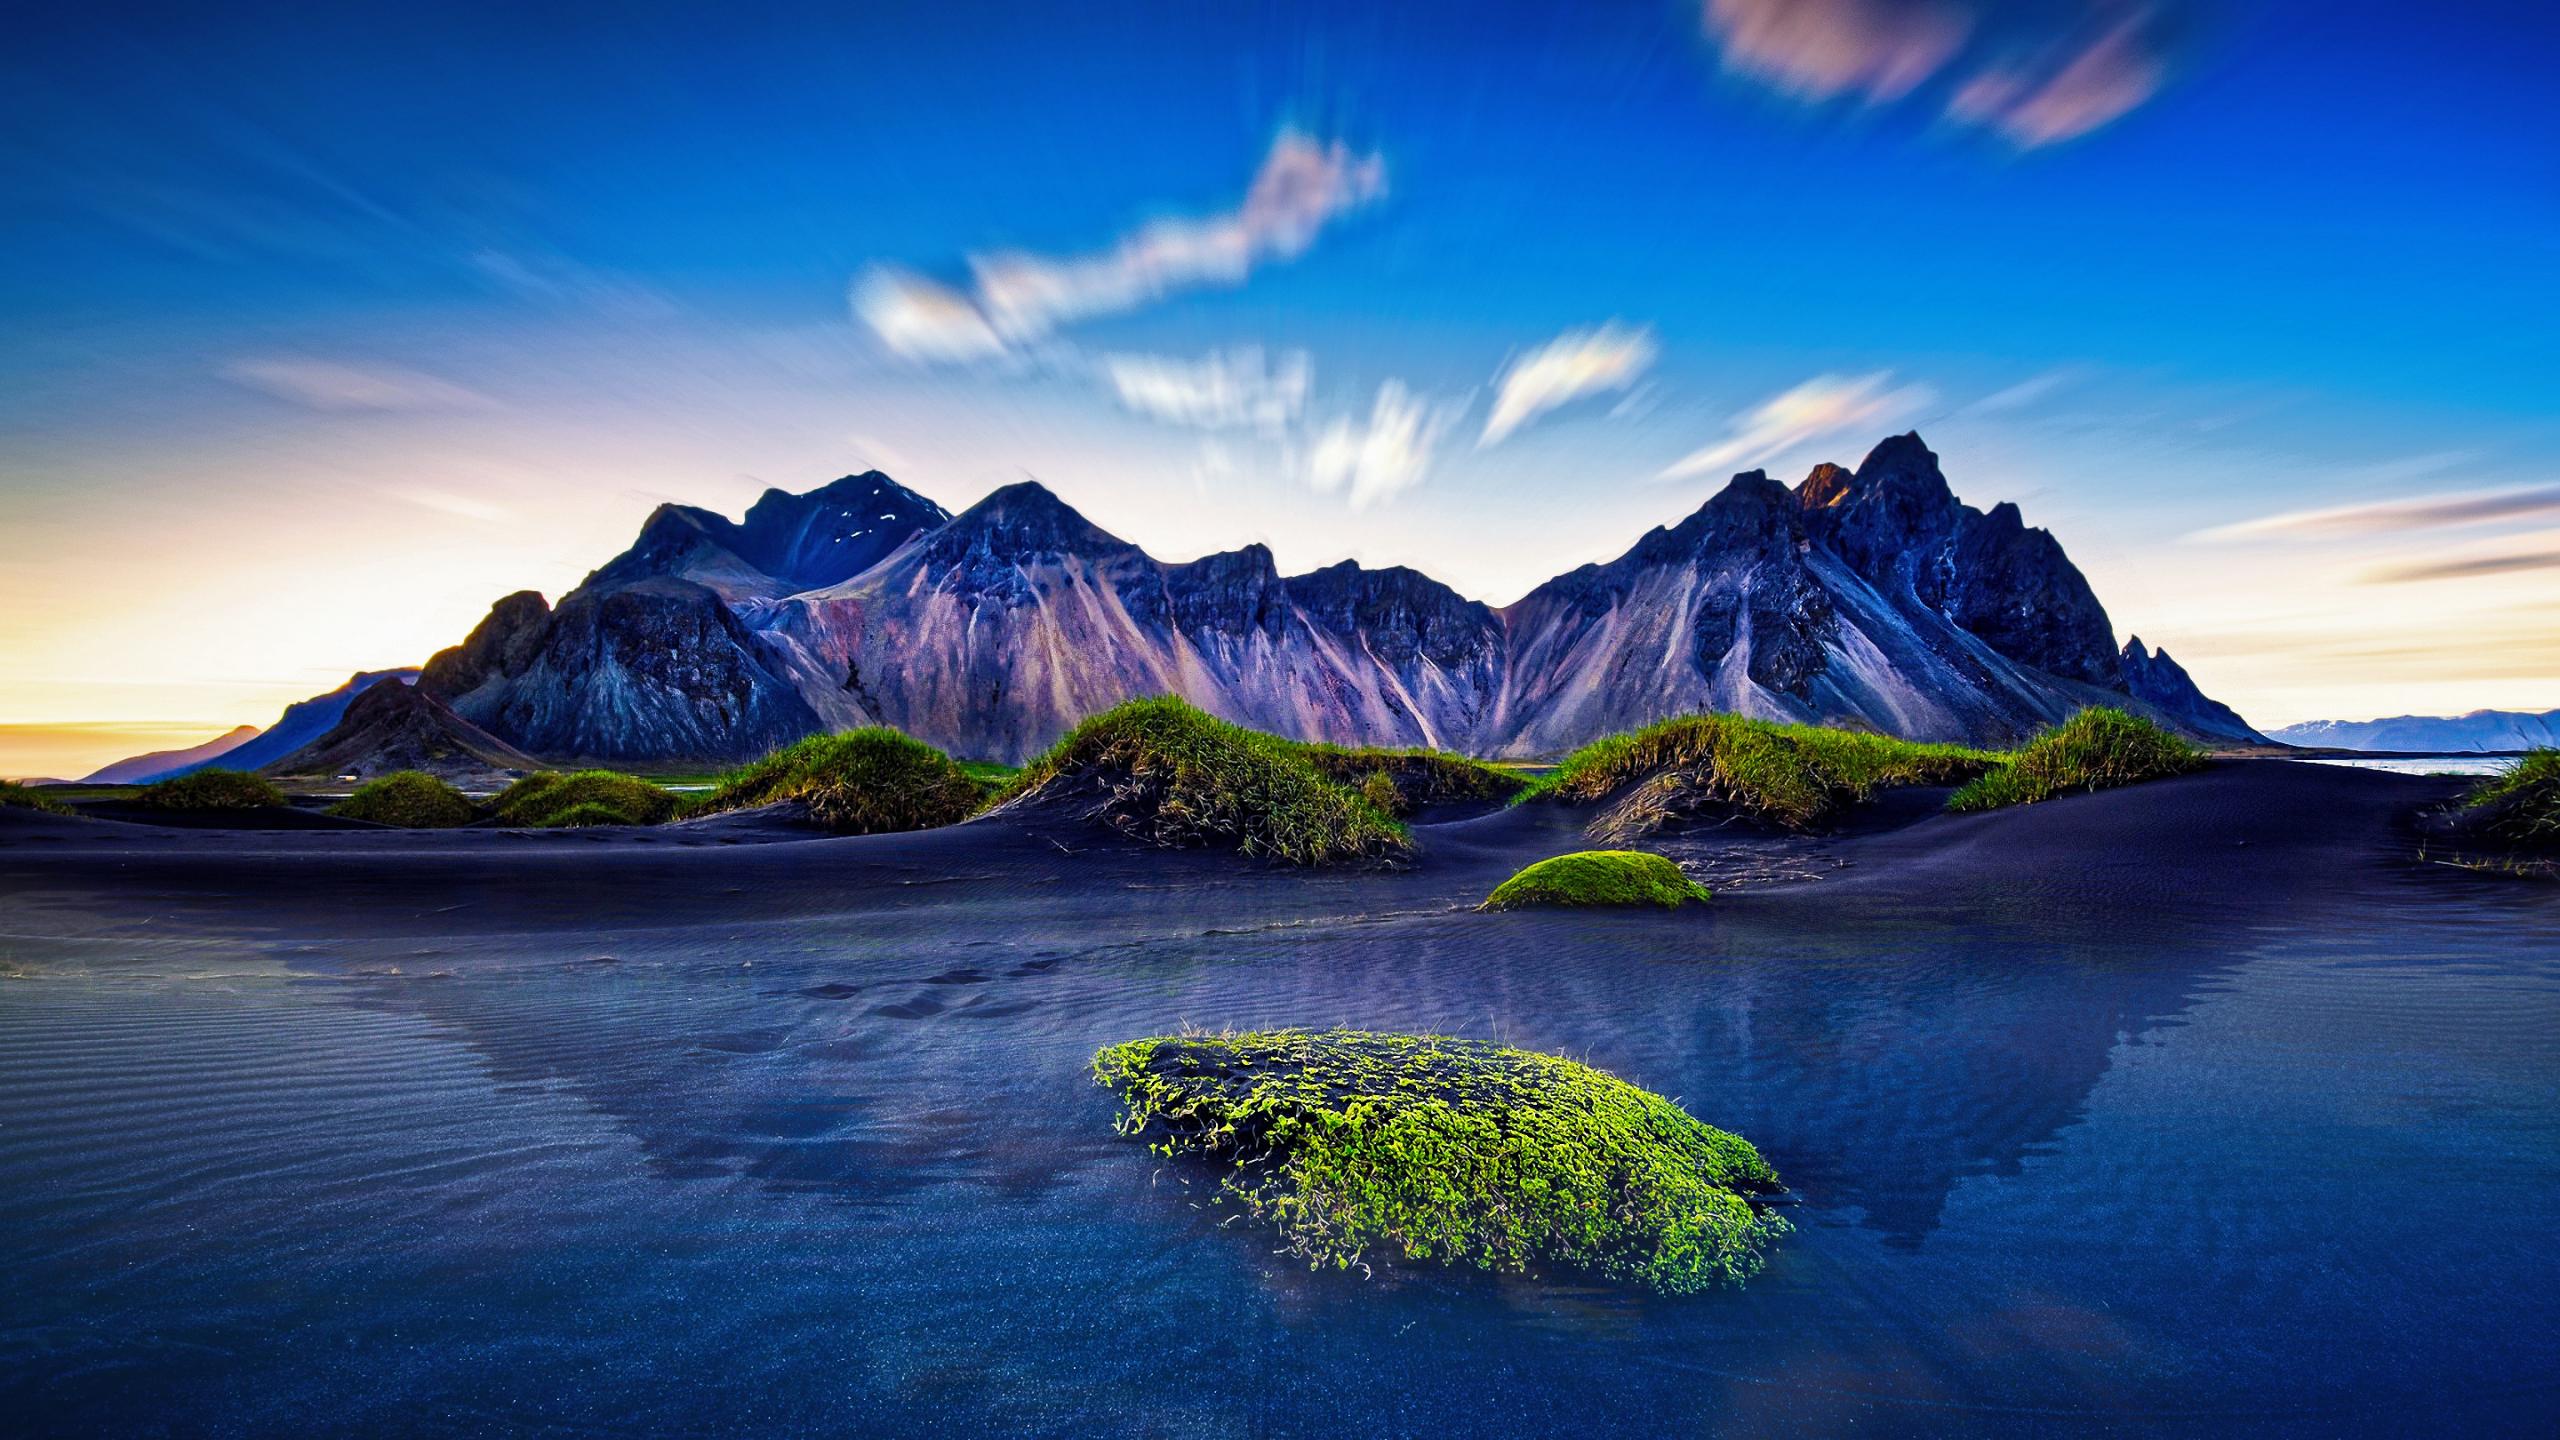 2560 x 1440 · jpeg - Download 2560x1440 wallpaper mountains, iceland, reflections, nature ...